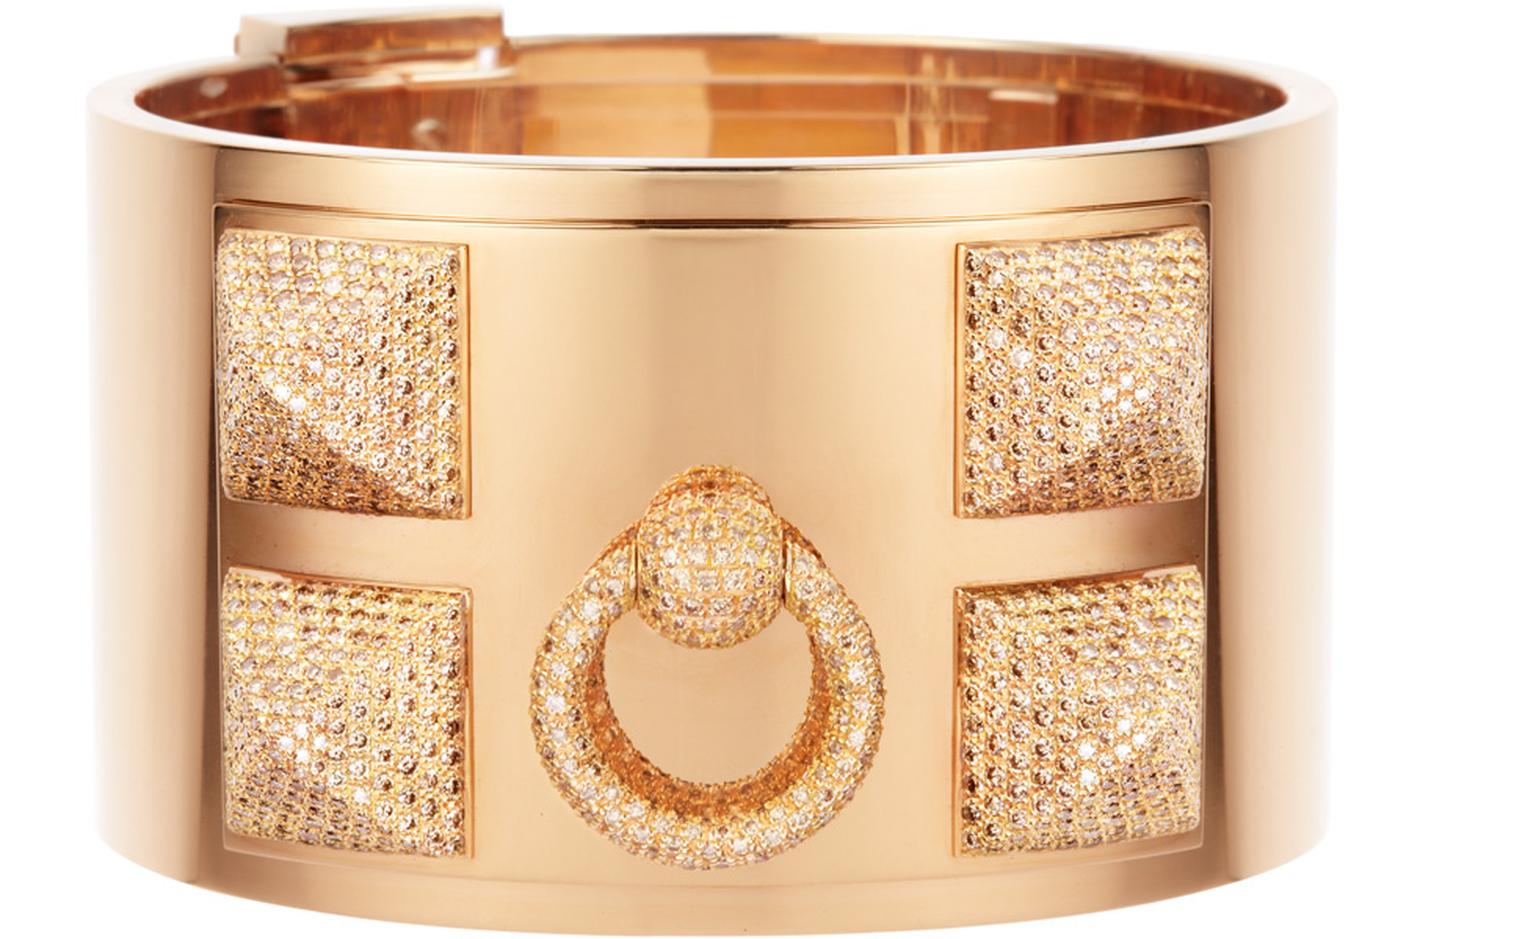 Hermes cuff in gold with diamonds